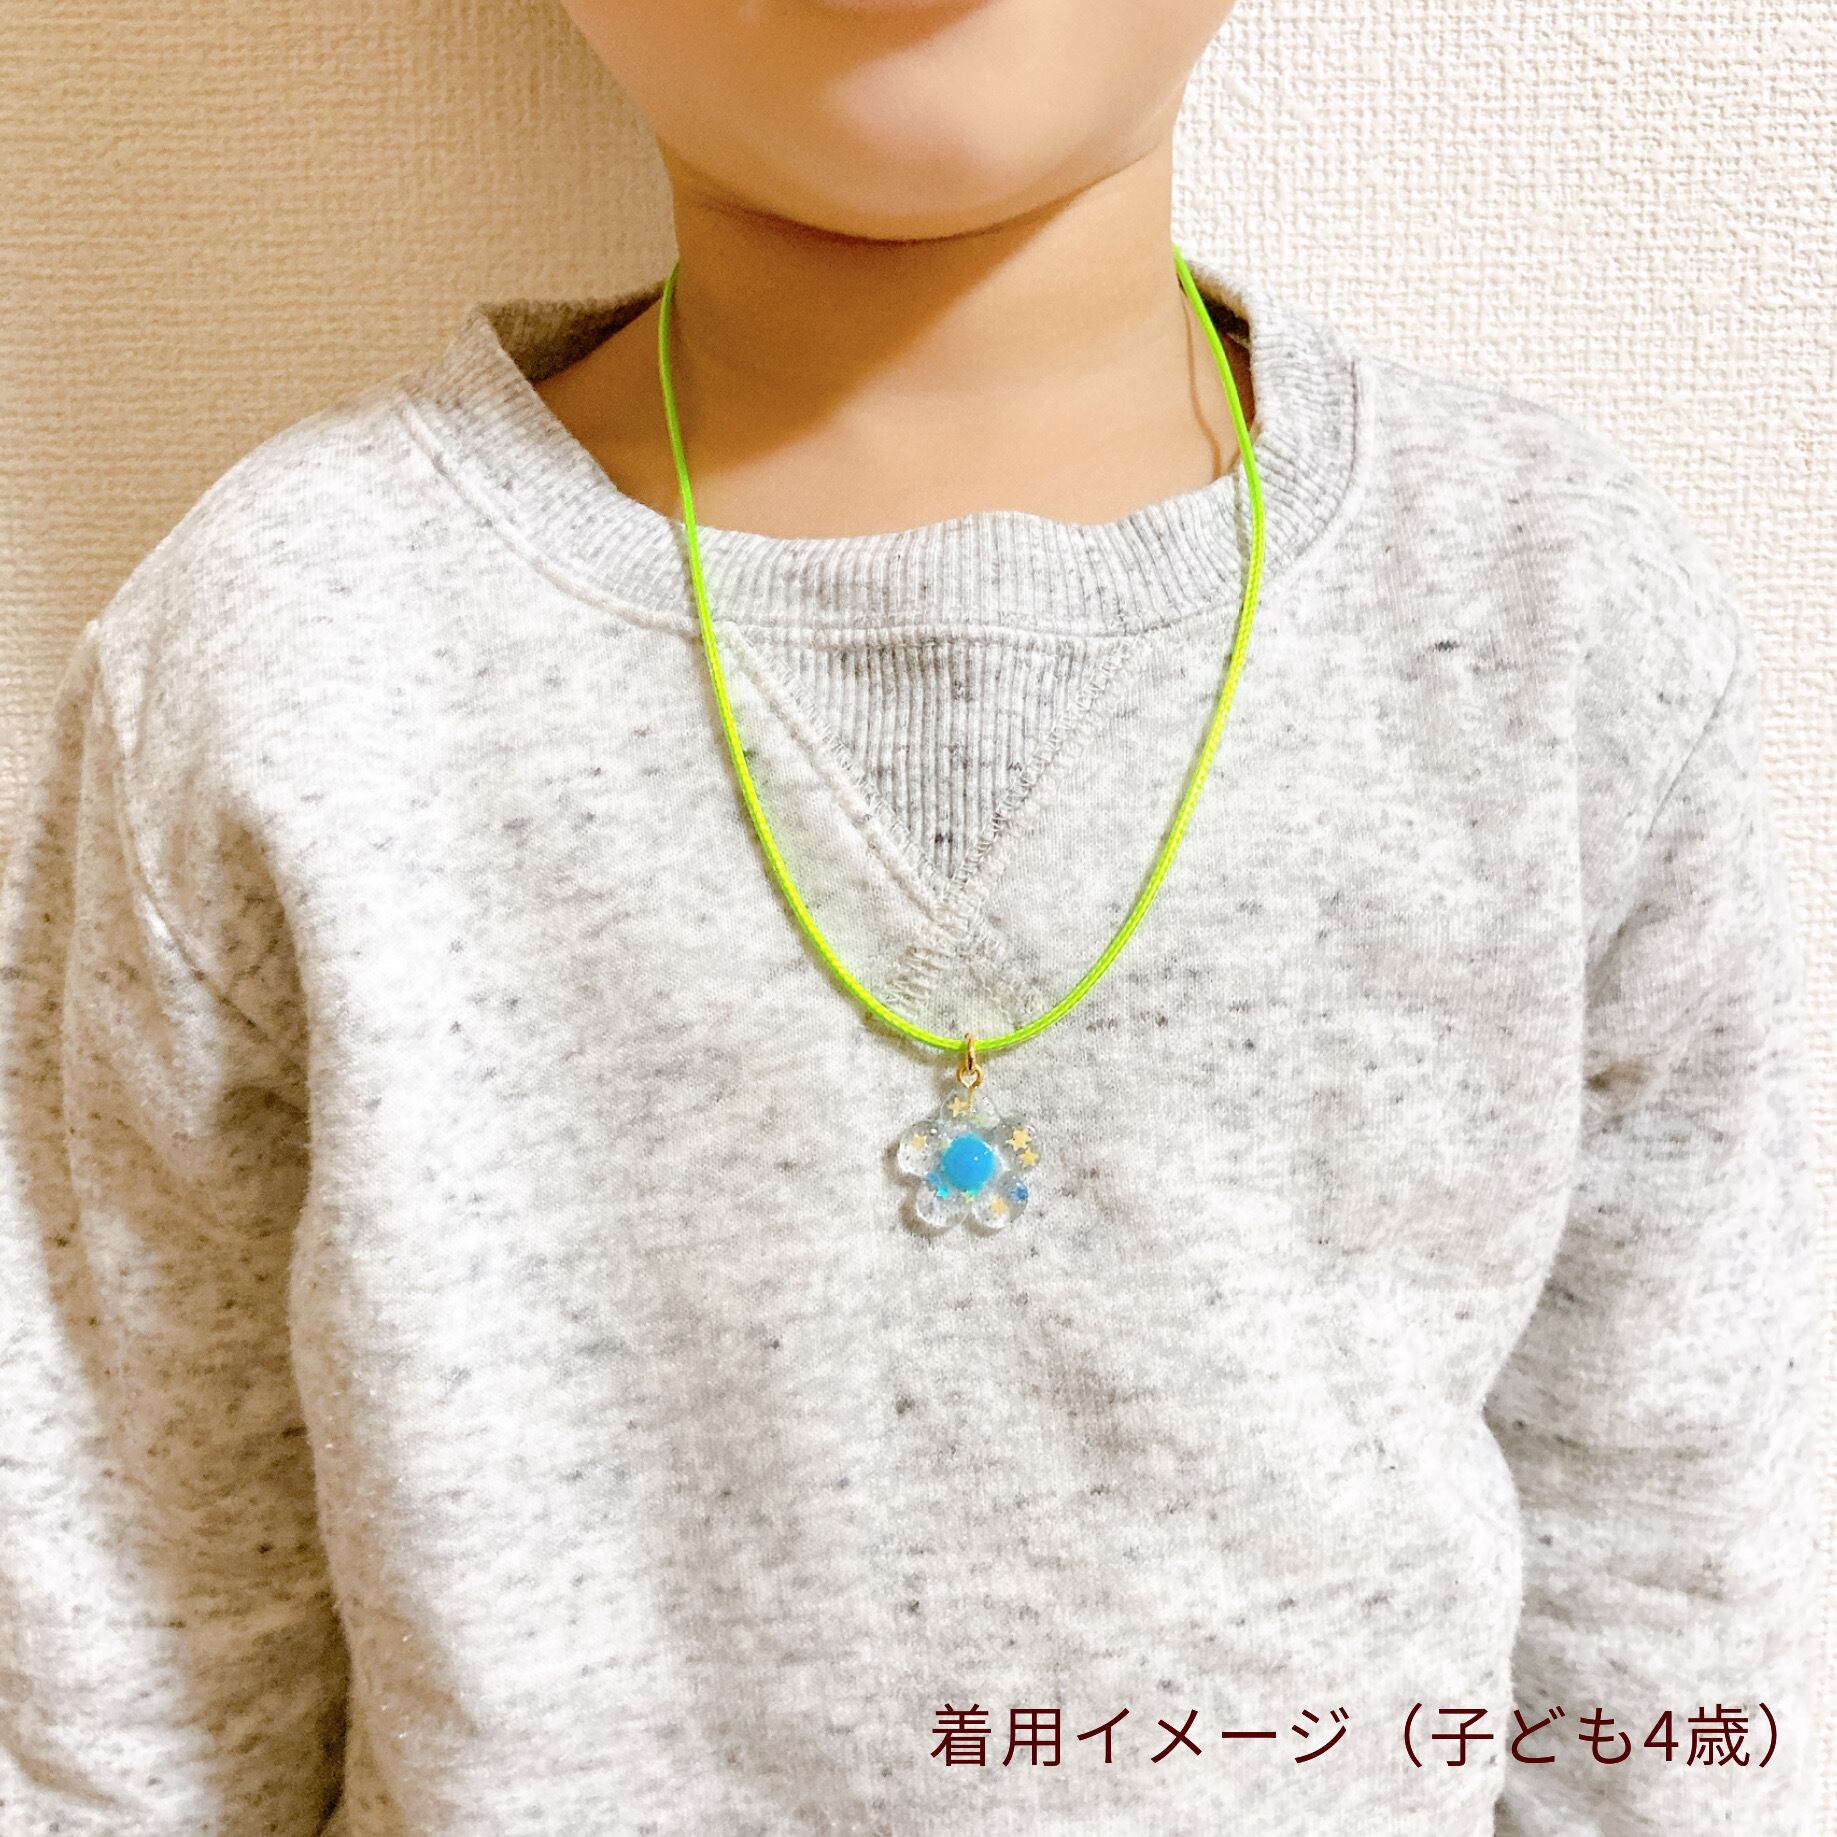 little   necklace  （ m - 4 ）  キッズネックレス